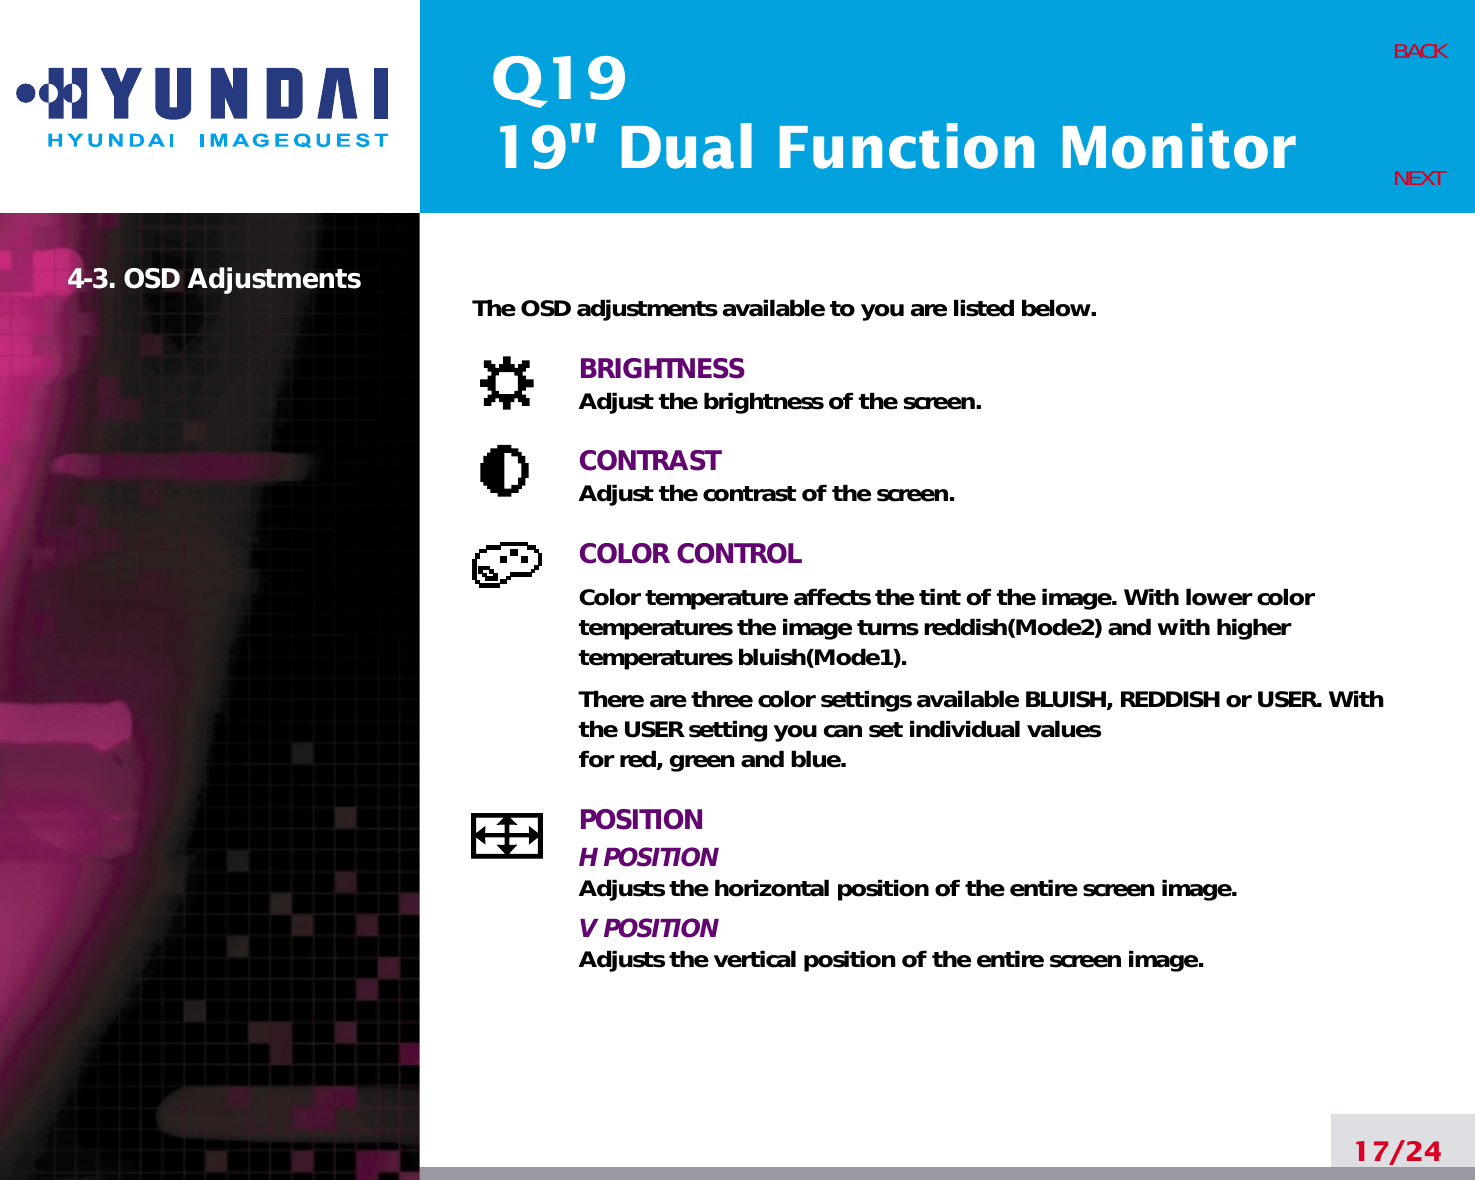 Q1919&quot; Dual Function Monitor17/24BACKNEXT4-3. OSD Adjustments The OSD adjustments available to you are listed below.BRIGHTNESSAdjust the brightness of the screen.CONTRASTAdjust the contrast of the screen.COLOR CONTROLColor temperature affects the tint of the image. With lower colortemperatures the image turns reddish(Mode2) and with highertemperatures bluish(Mode1).There are three color settings available BLUISH, REDDISH or USER. Withthe USER setting you can set individual valuesfor red, green and blue.POSITIONH POSITIONAdjusts the horizontal position of the entire screen image.V POSITIONAdjusts the vertical position of the entire screen image.